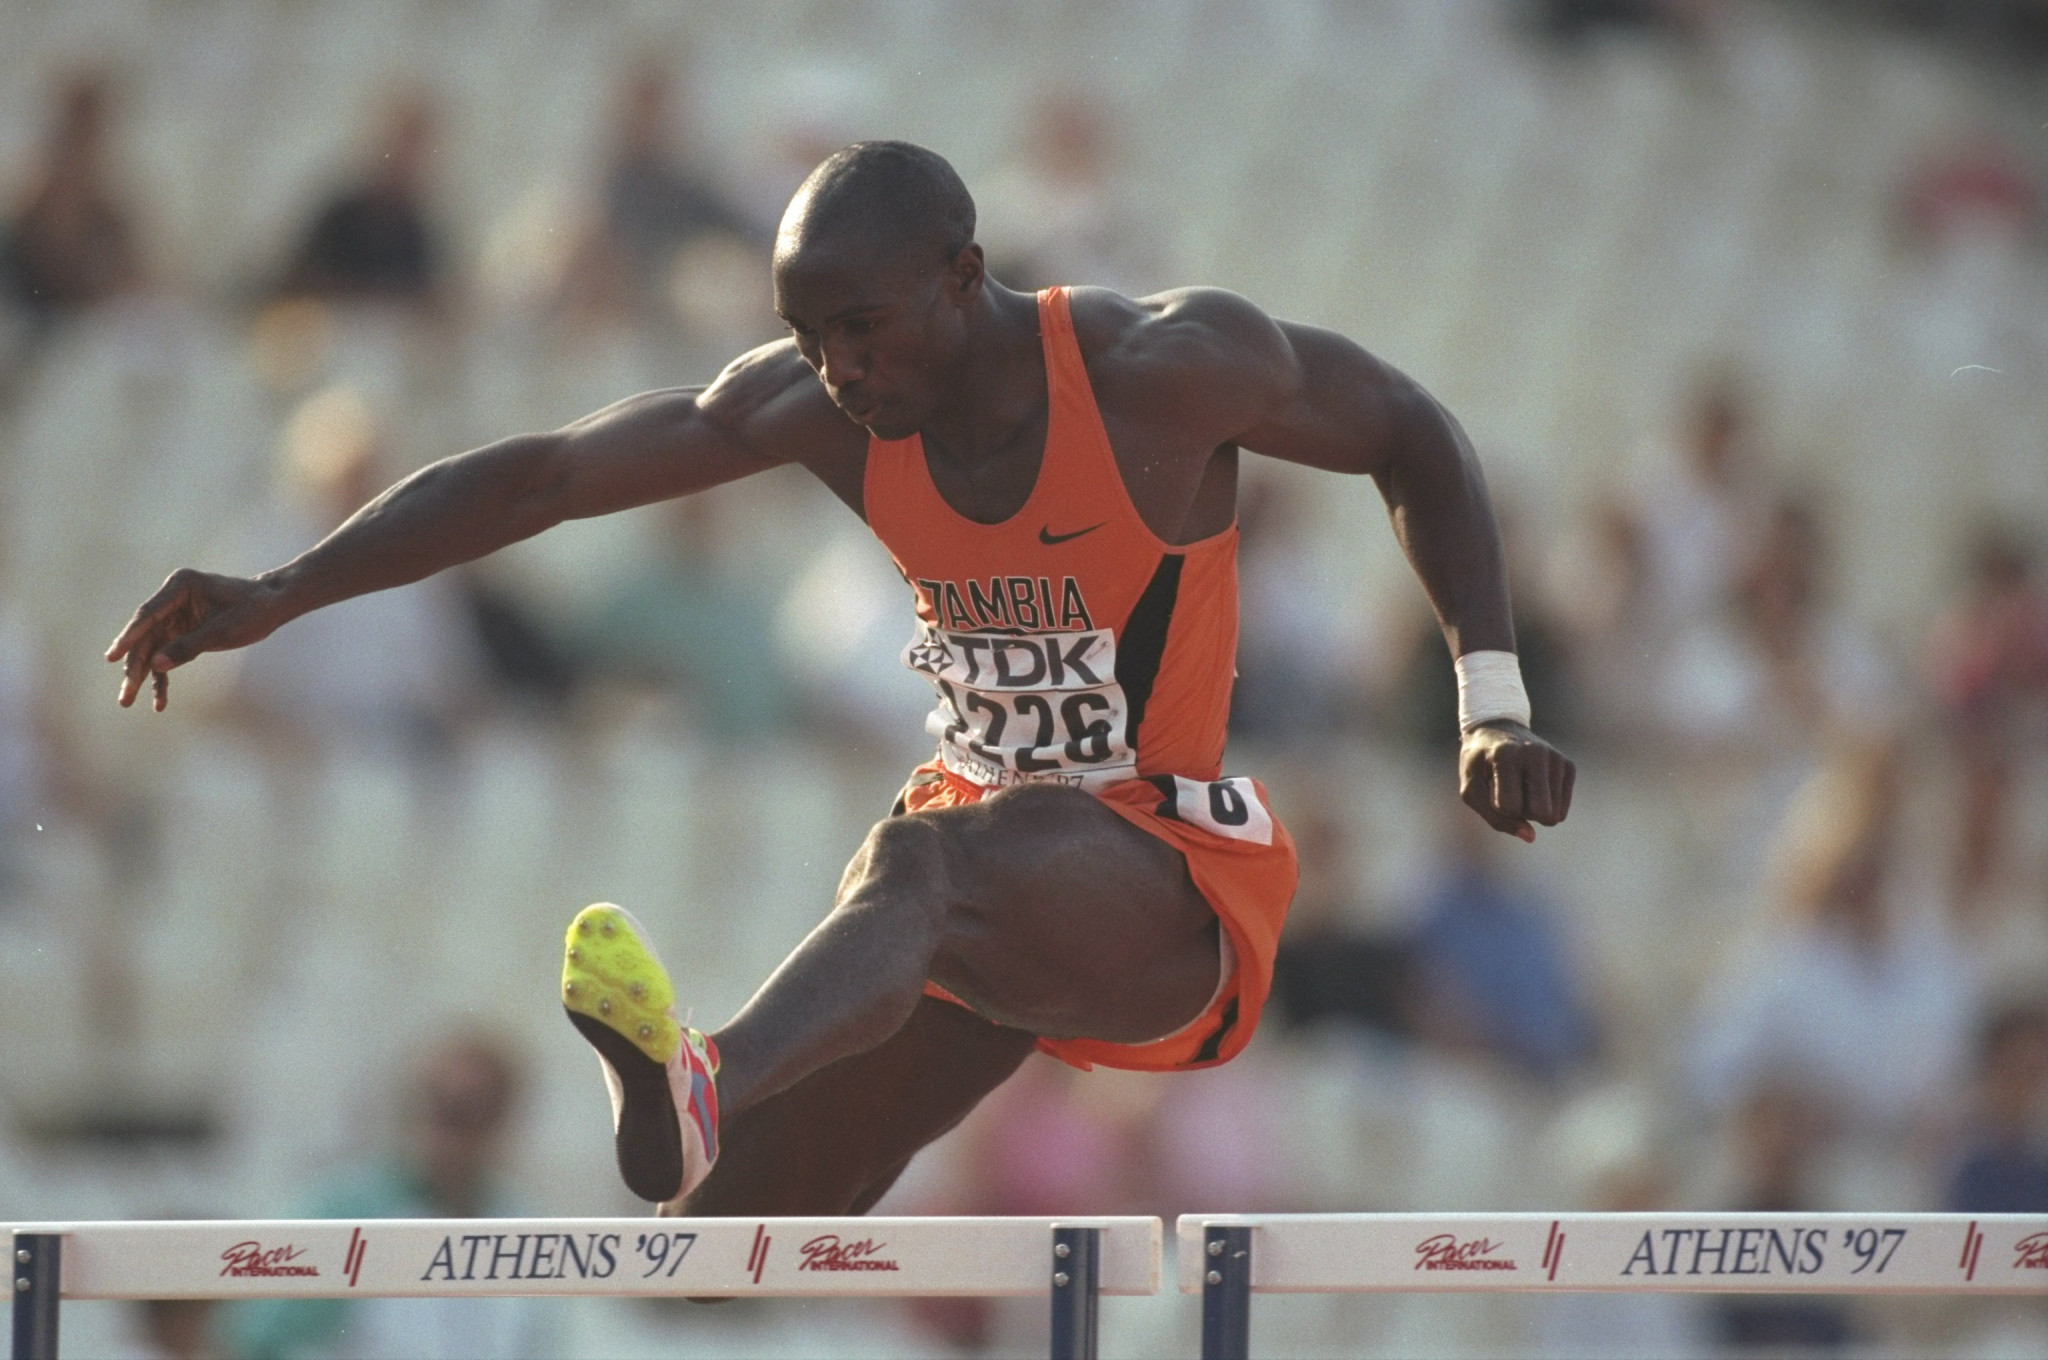 Zambia's Samuel Matete won one of Zambia's two Olympic medals ©Getty Images